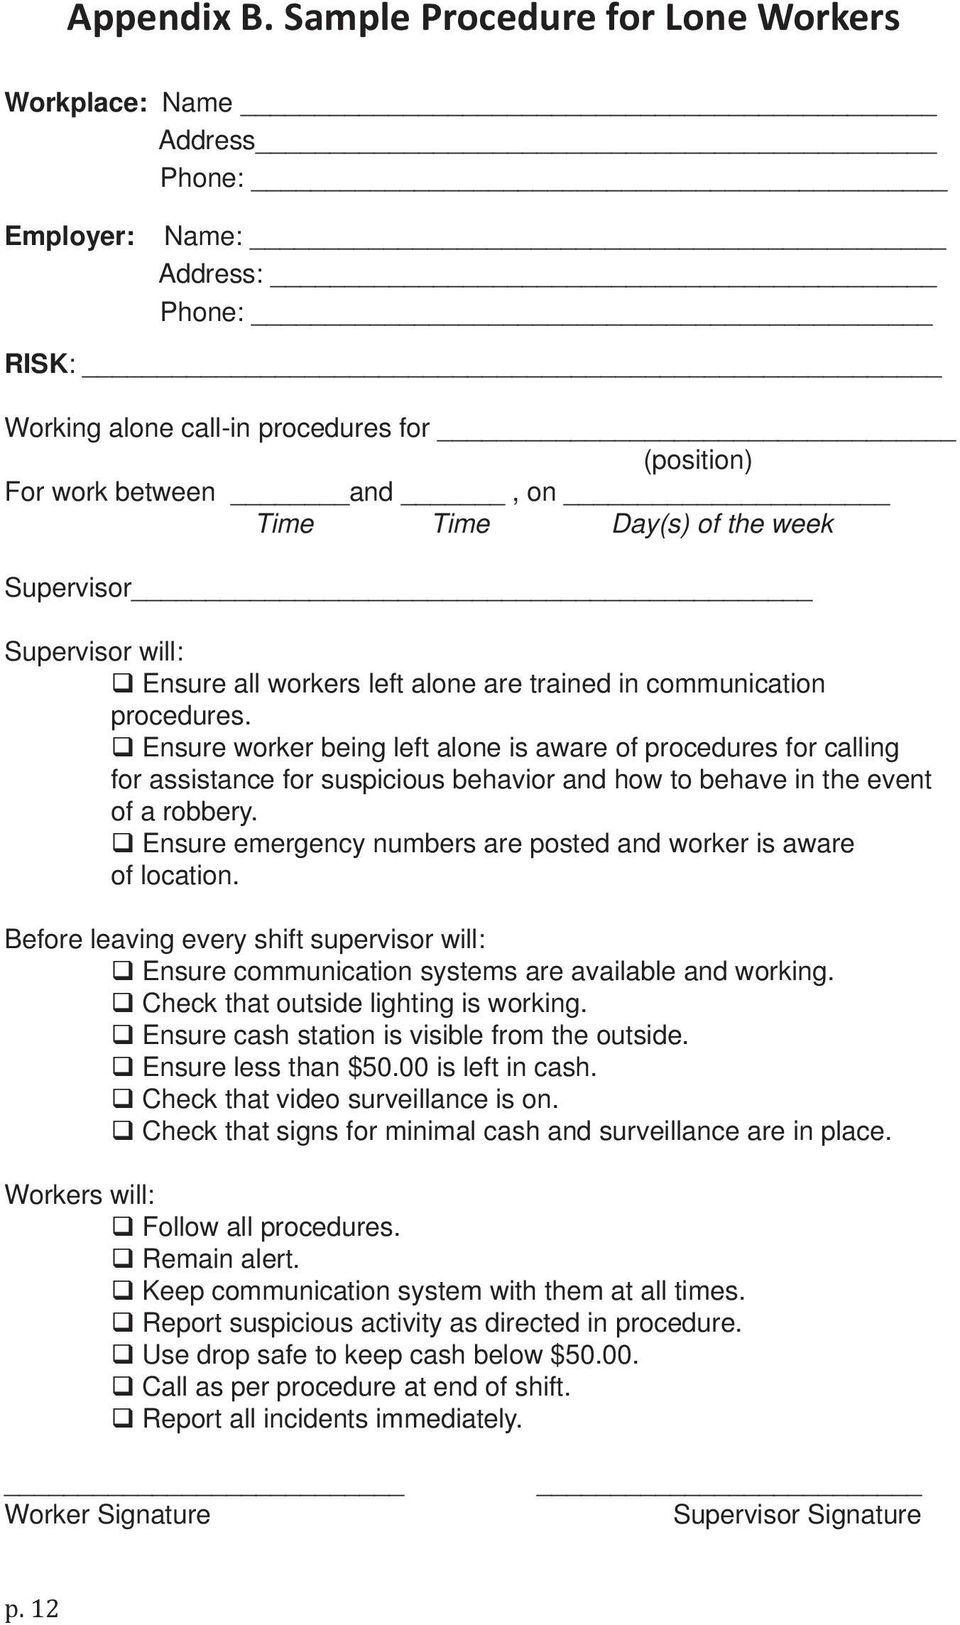 week Supervisor Supervisor will: Ensure all workers left alone are trained in communication procedures.